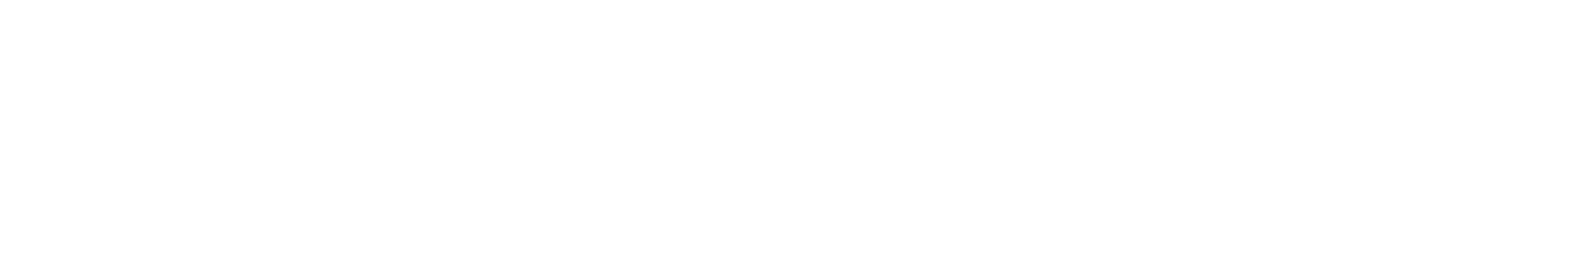 Community Health Systems logo in transparent PNG and vectorized SVG formats